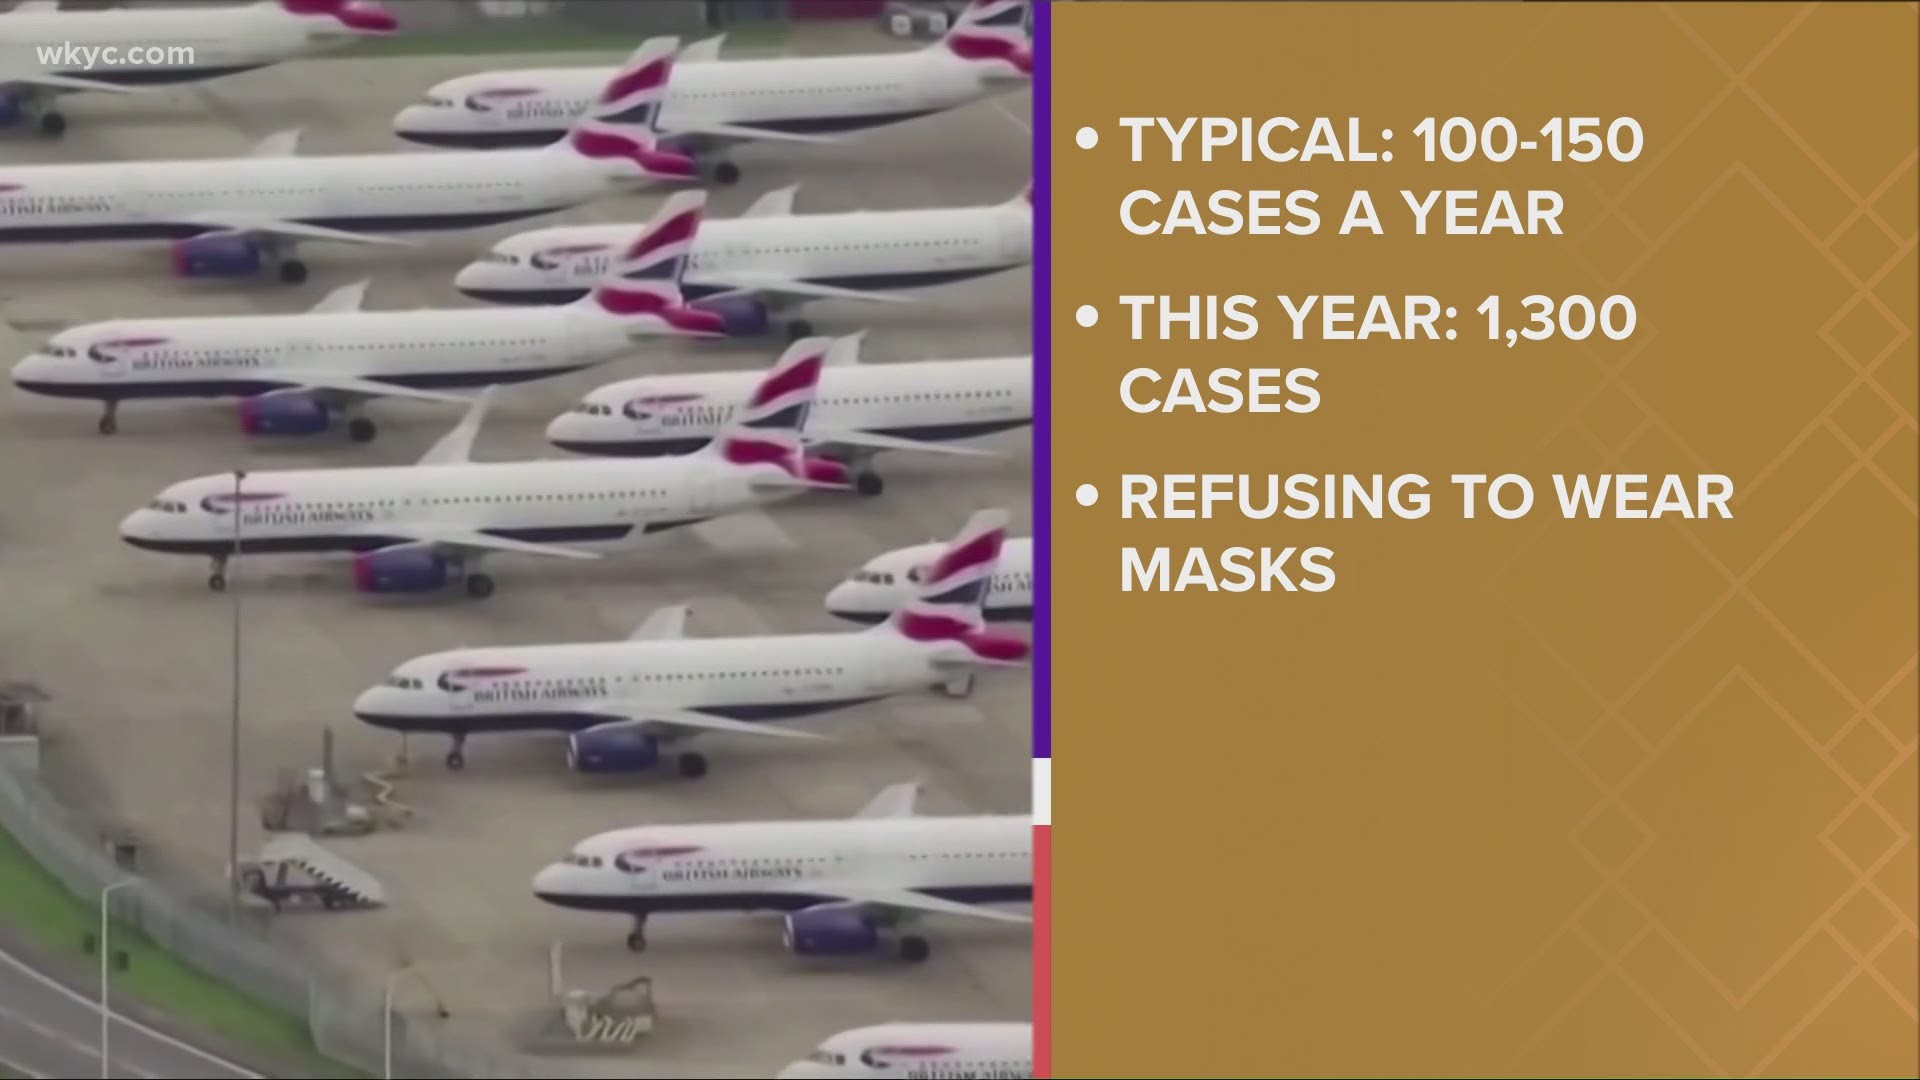 The FAA typically reports just 100-150 cases of bad-behavior passengers per year. So far in 2021, there have been more than 1,300 cases on record.